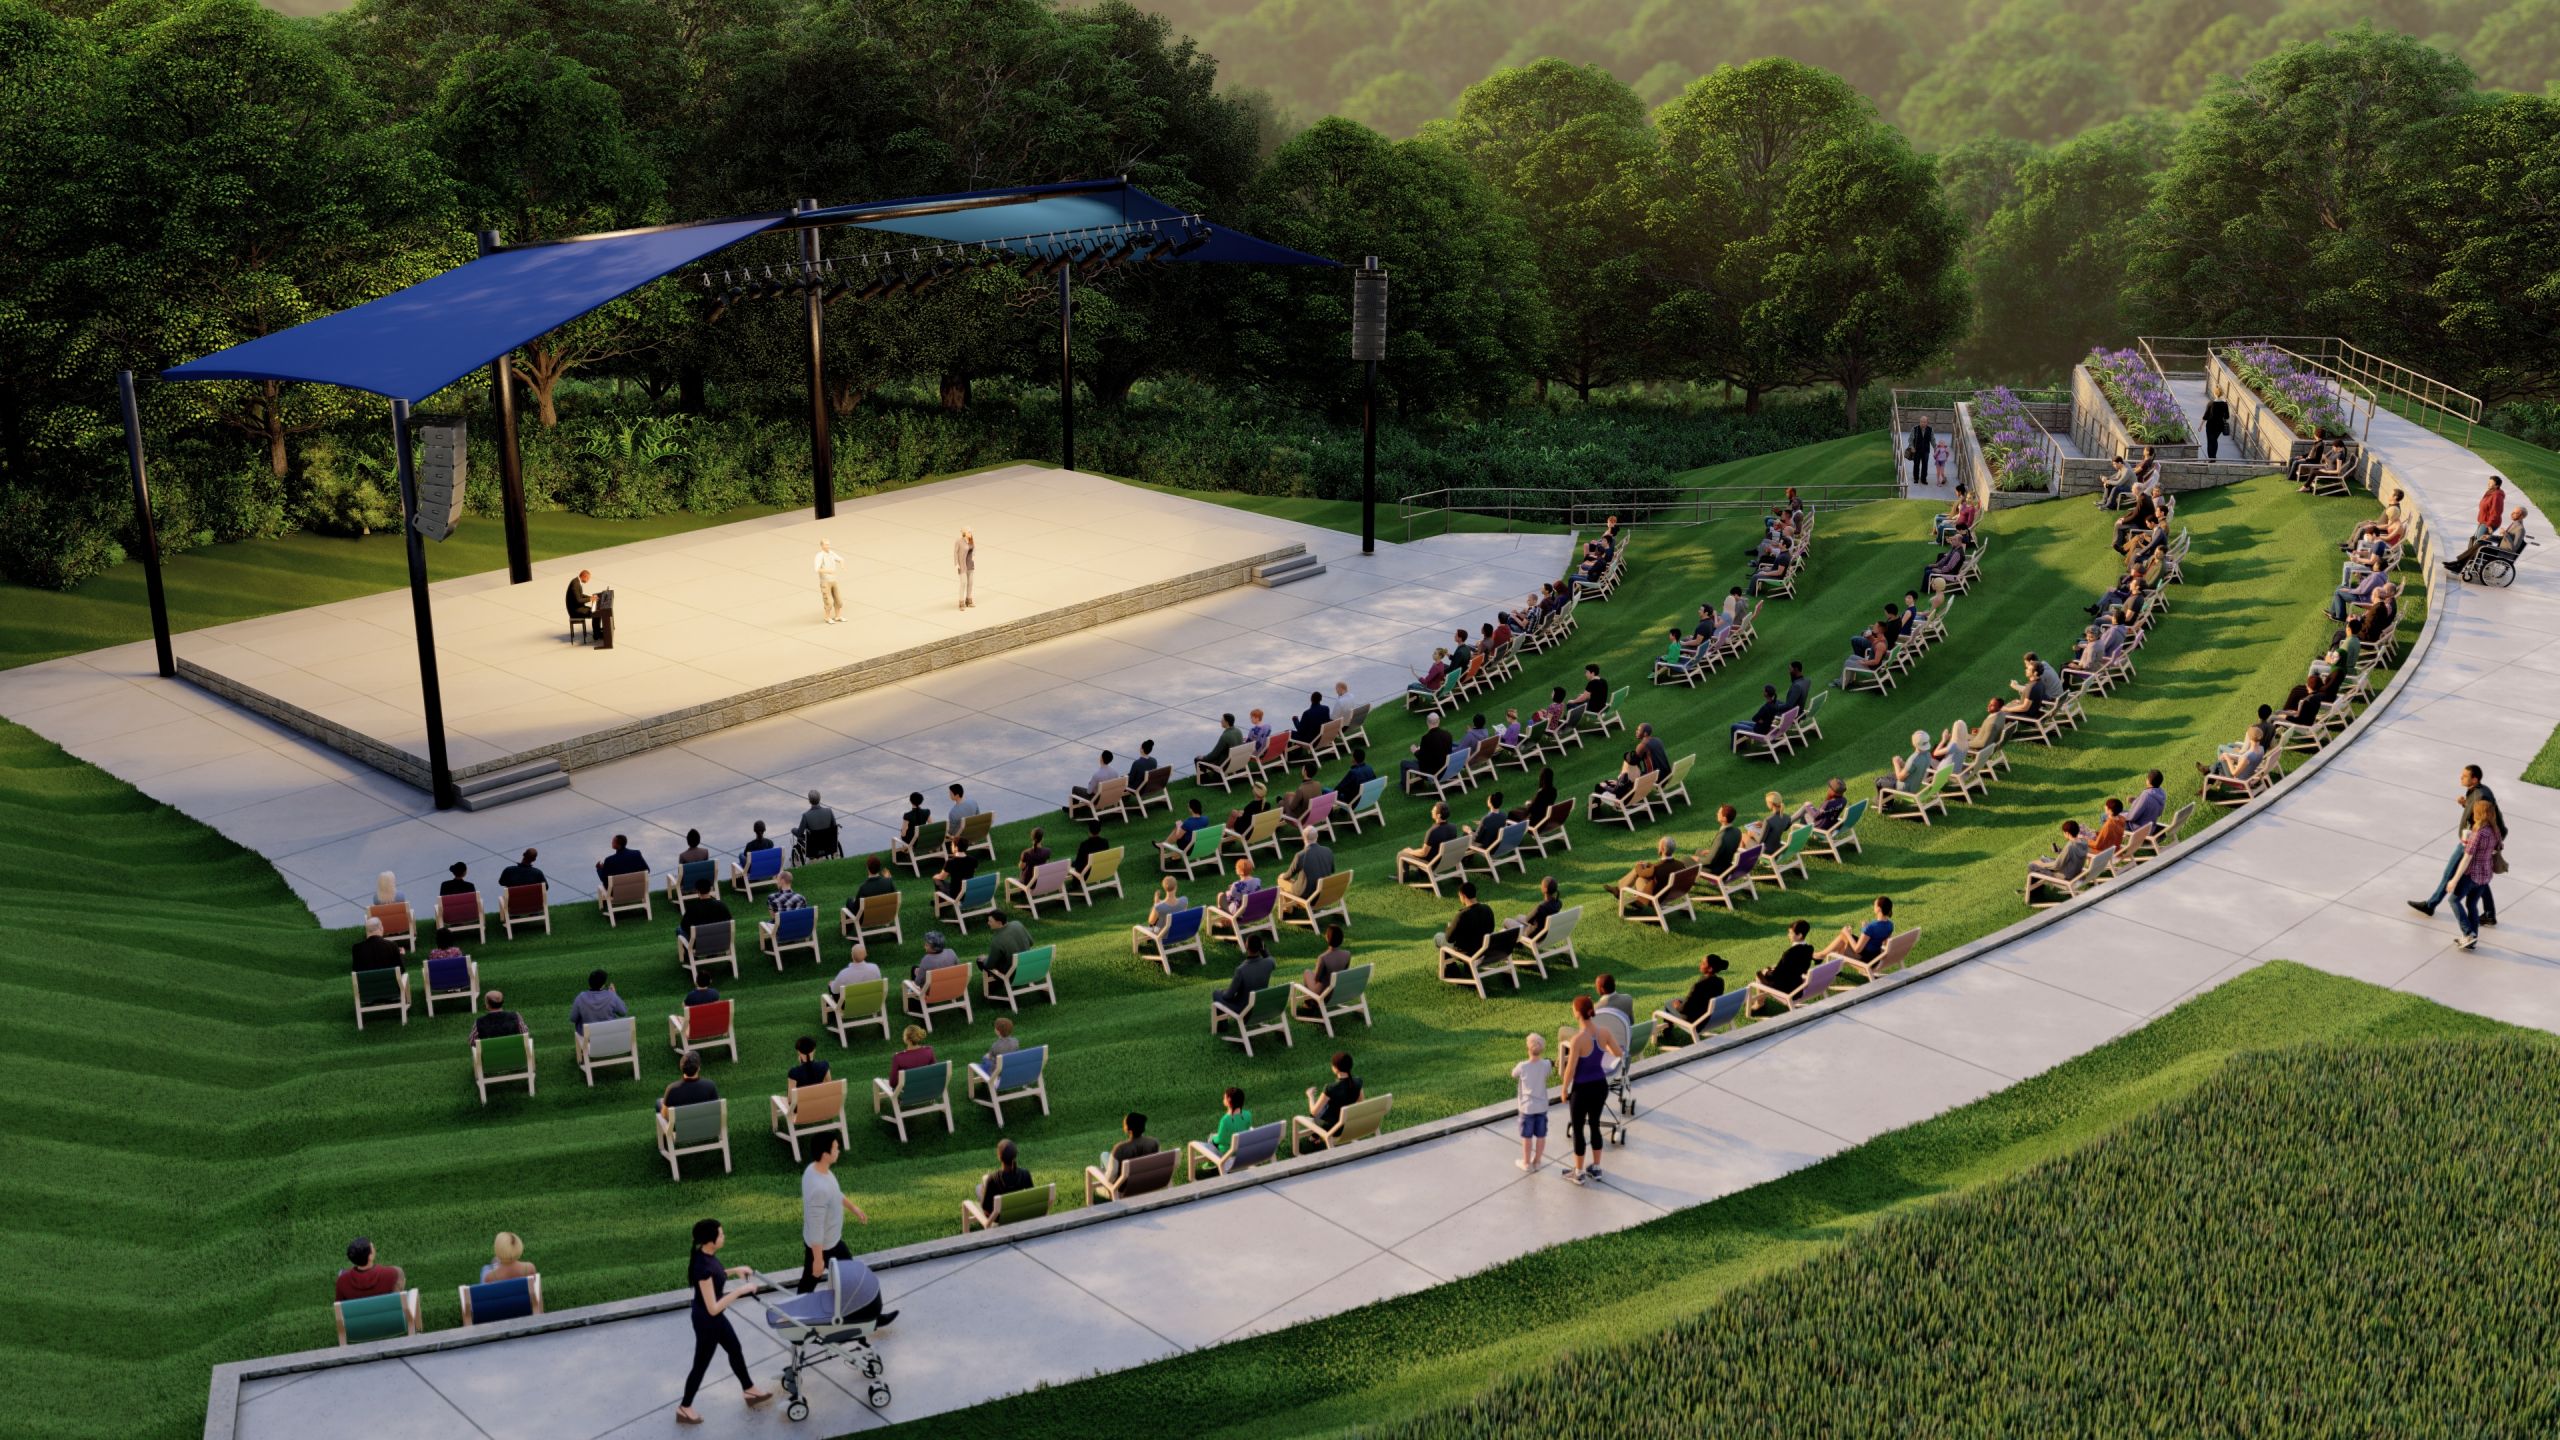 Amphitheater Ambitions: Clearing for Amphitheaters 2